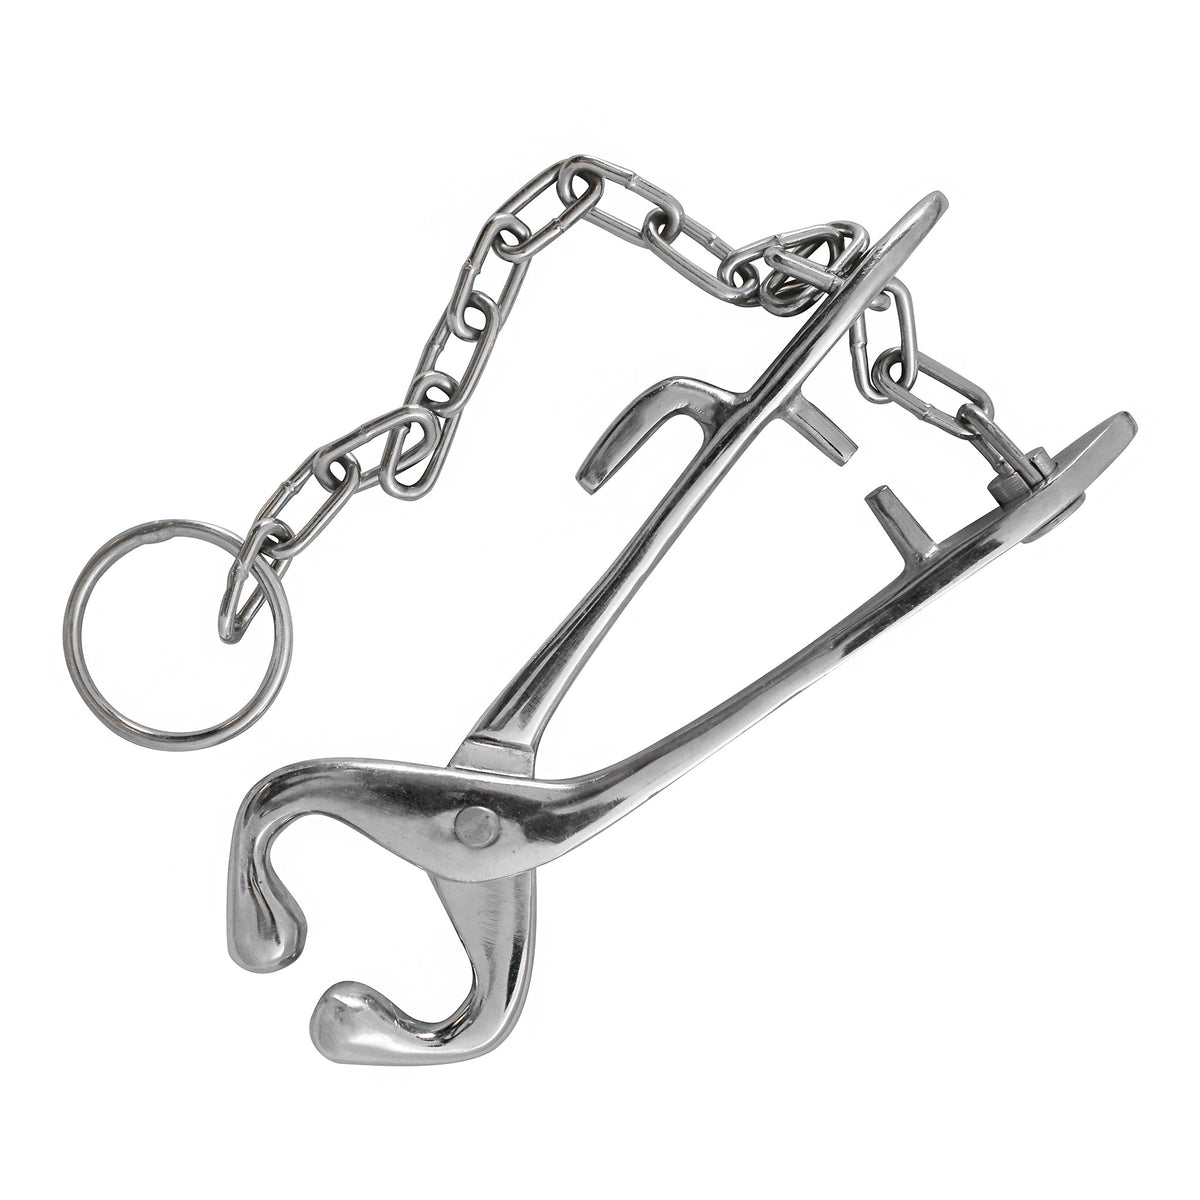 Bull Holder Pliers with Chain